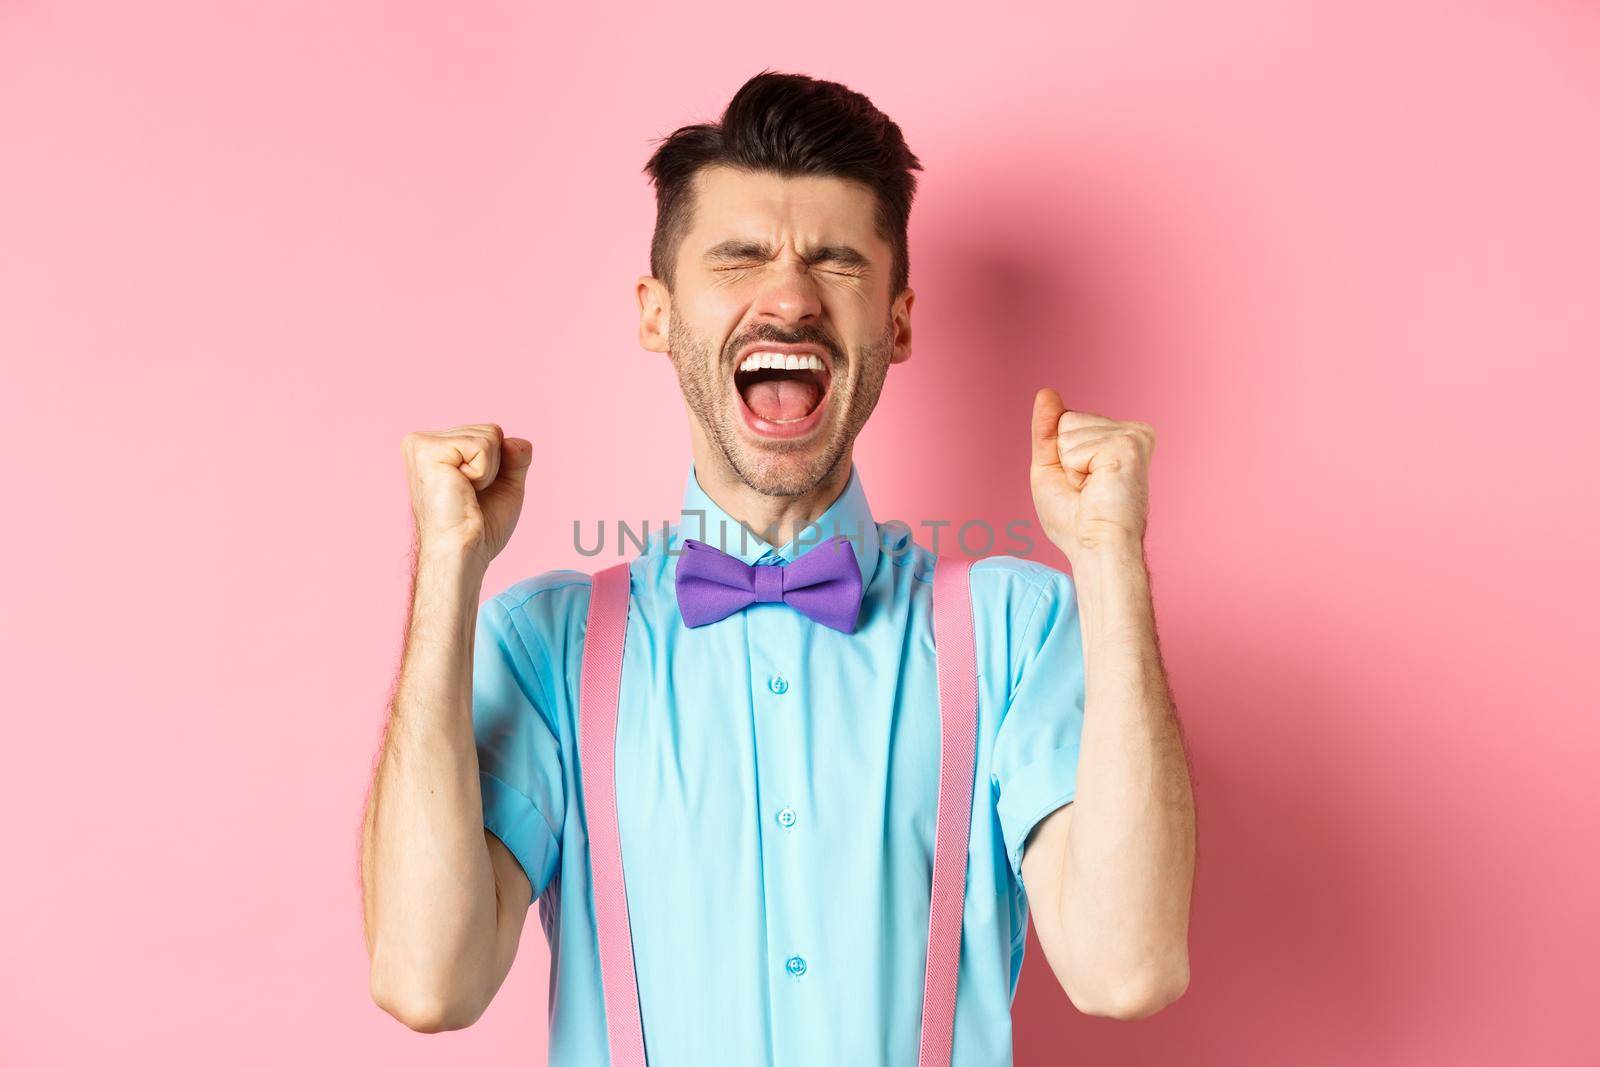 Relieved man shouting from happiness and joy, scream yes with closed eyes and clenched fists, celebrating victory, achieve goal and triumphing, standing over pink background.